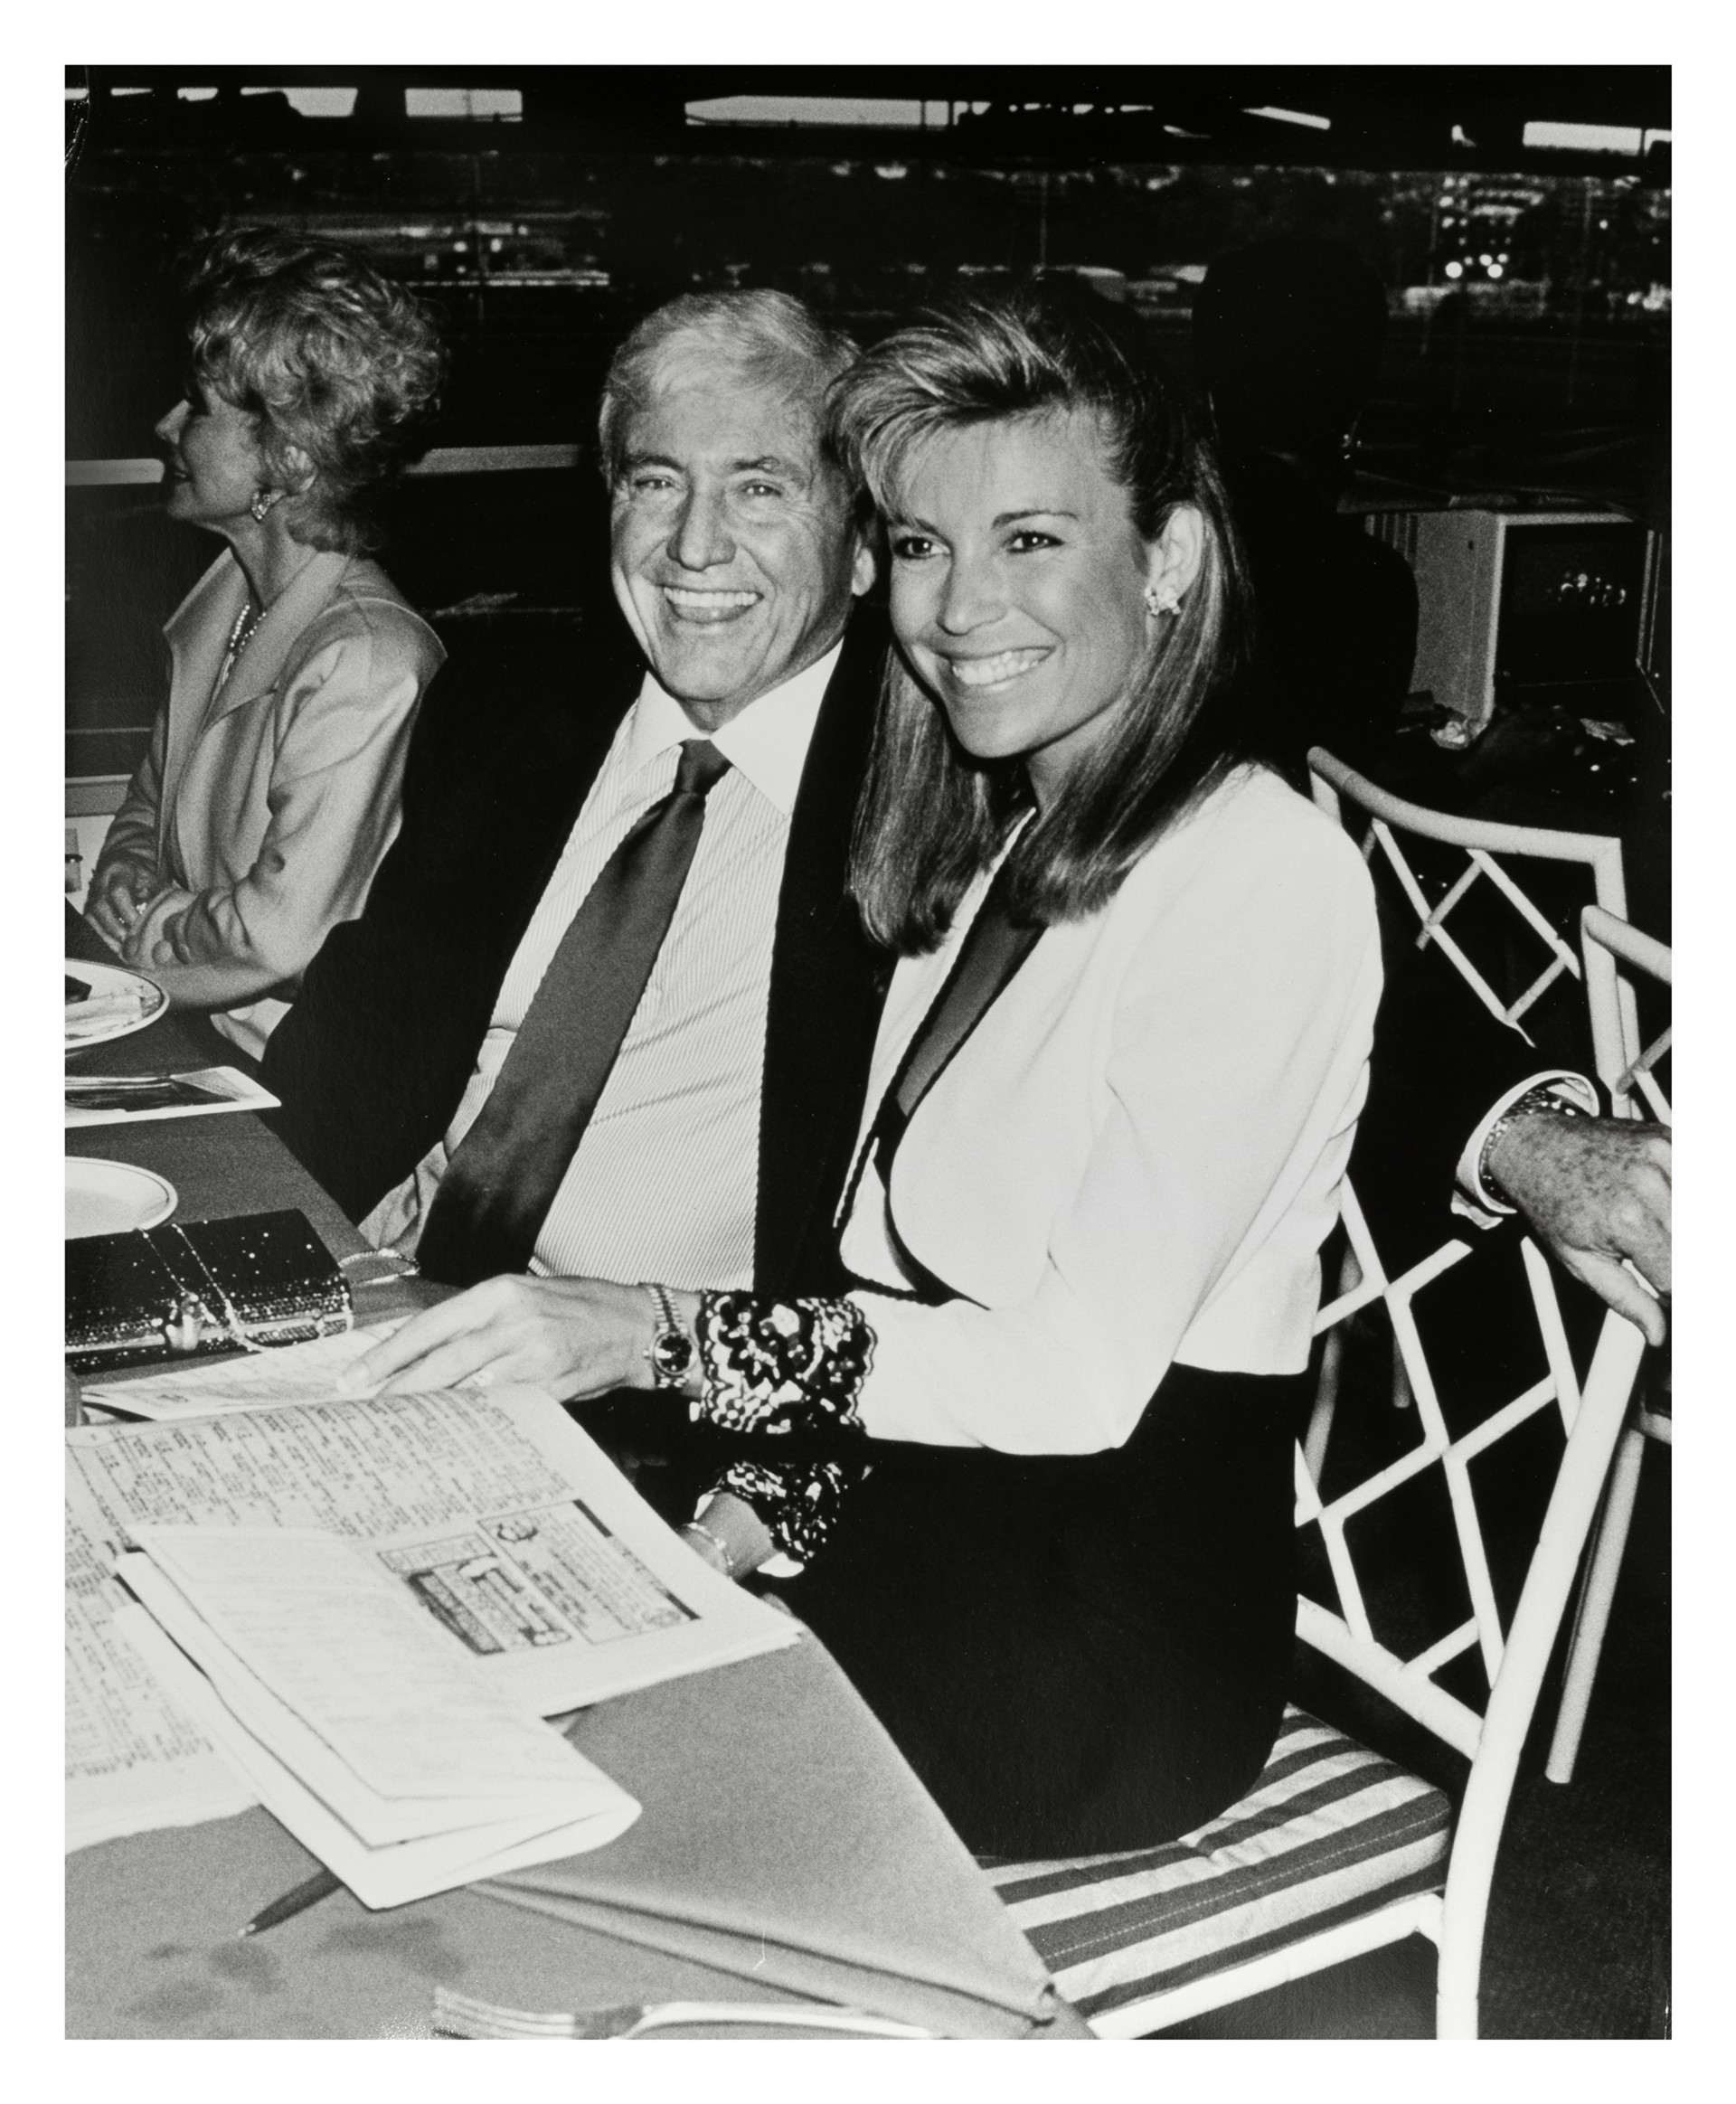 Merv Griffin and Vanna White by Ron Galella